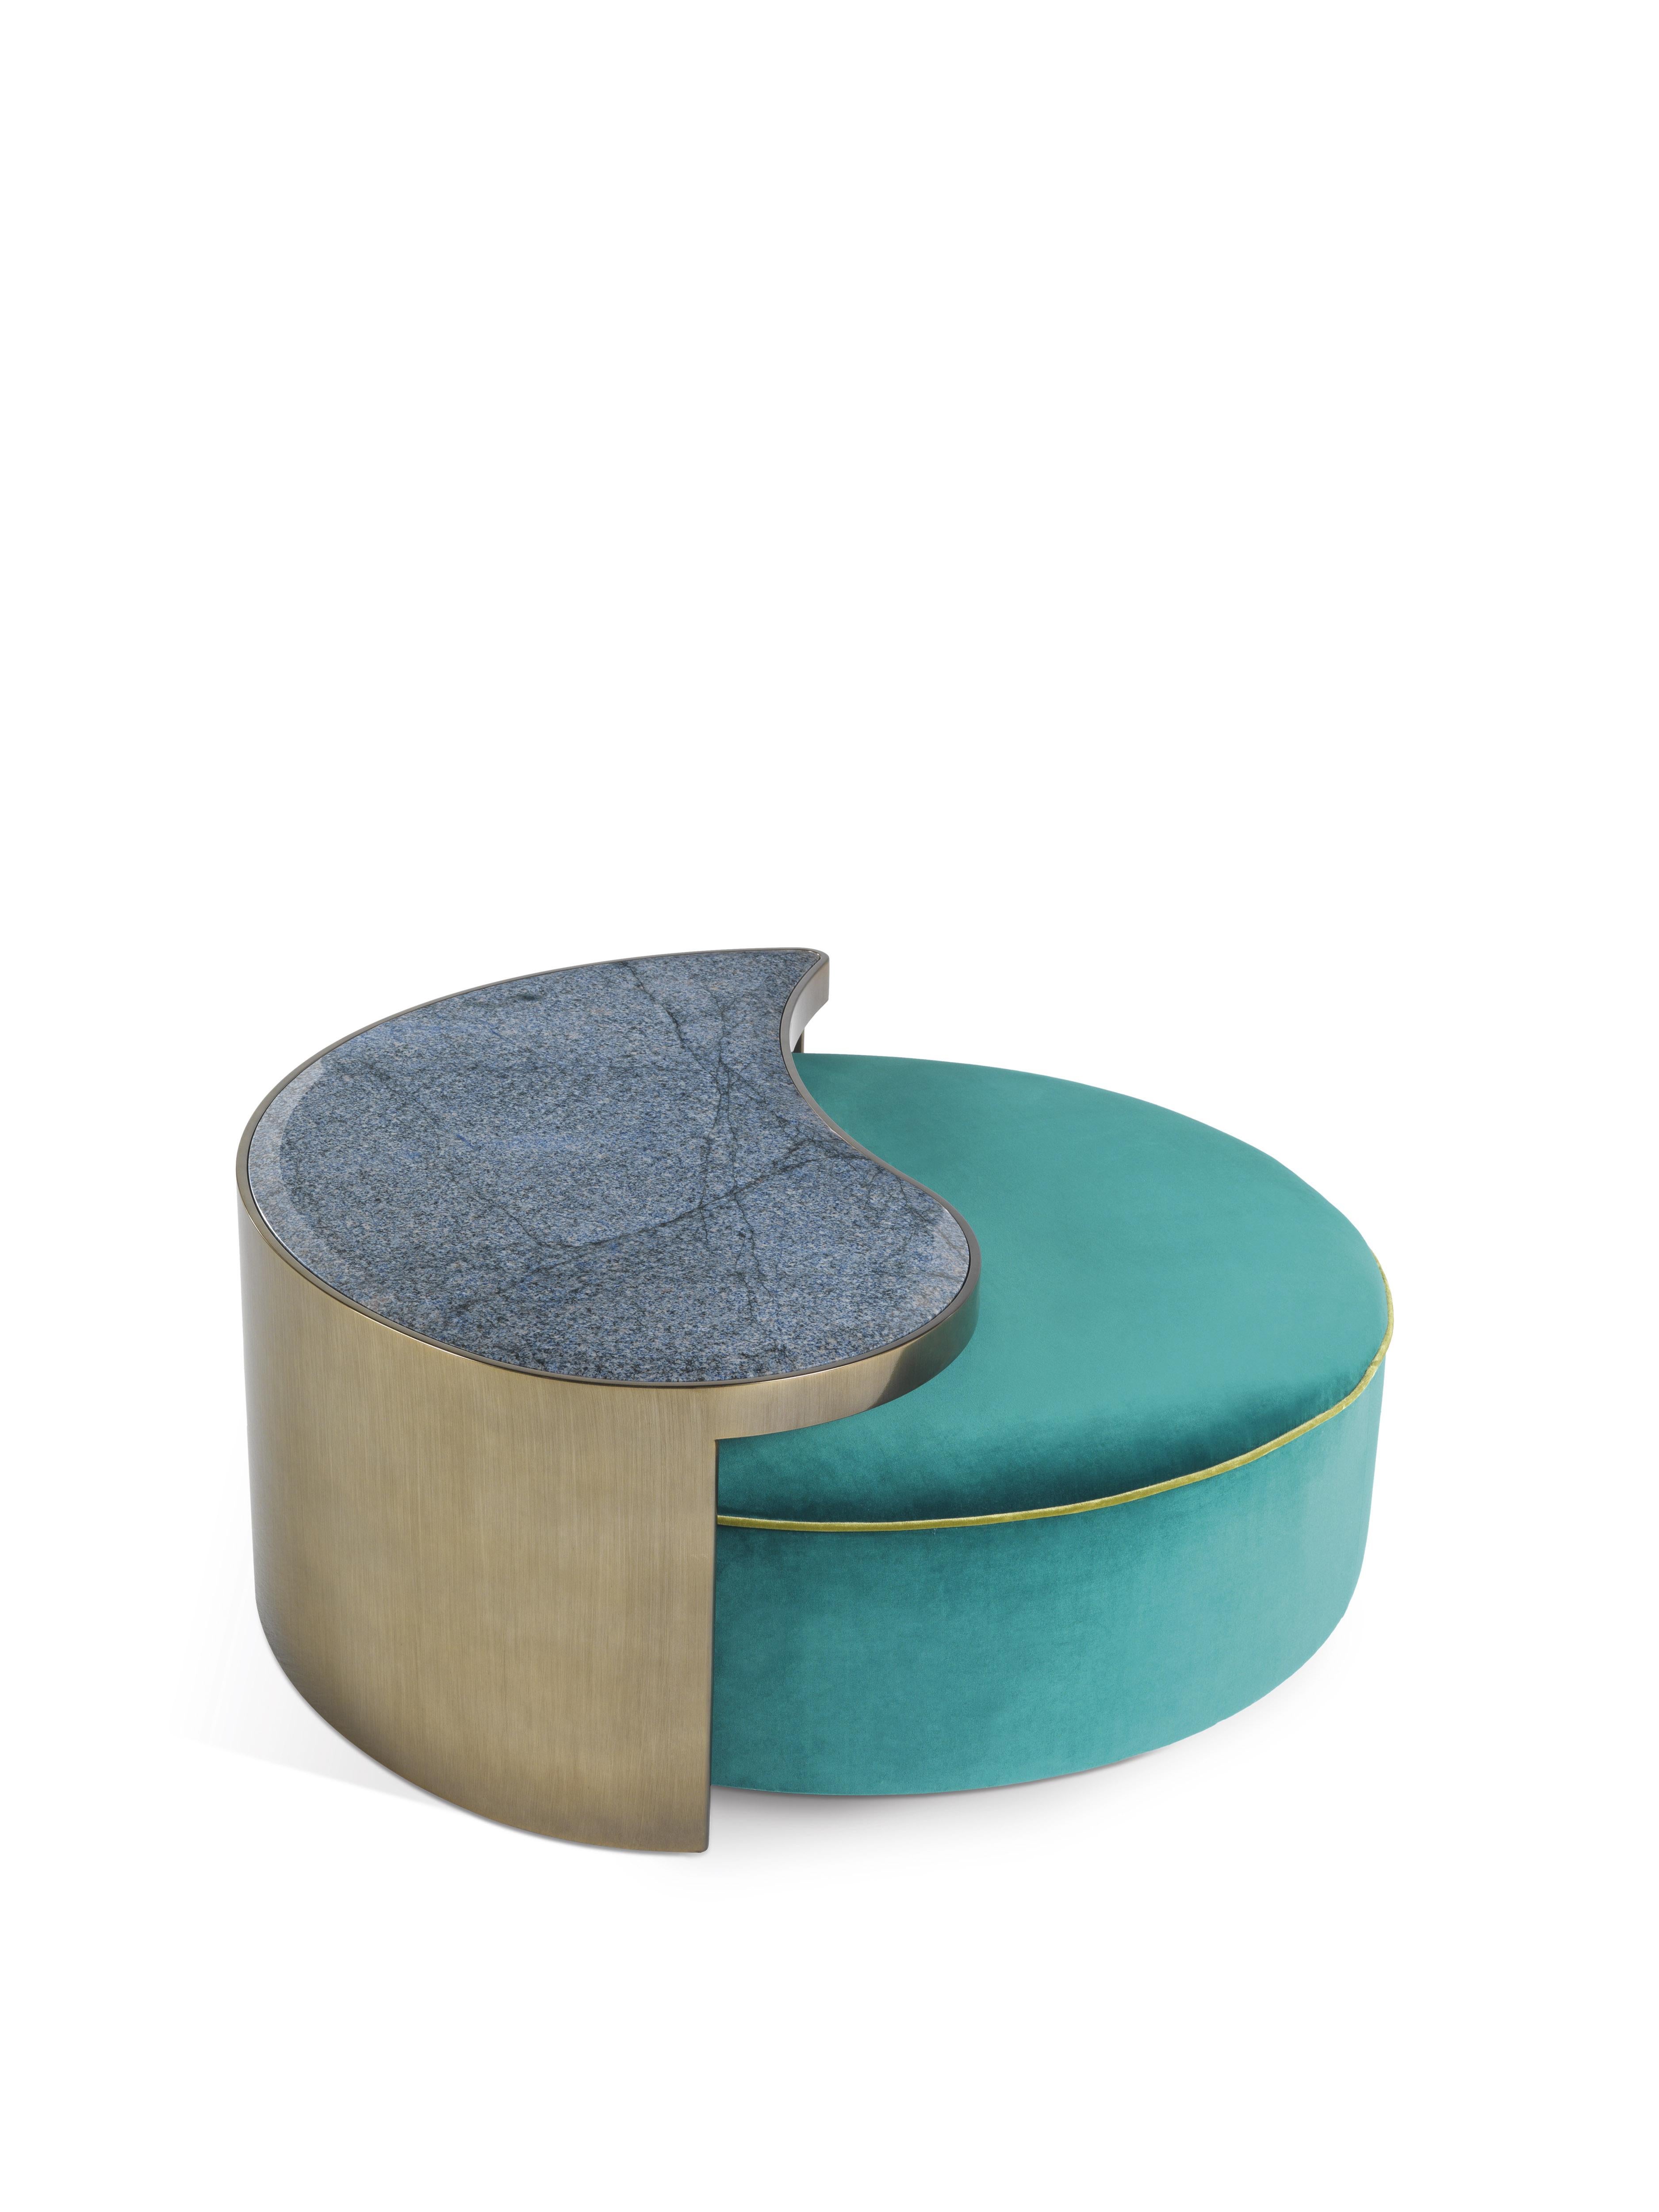 The harmony of two different elements comes together in a mystic hug, like in the Yin and Yang symbol. The softness of the pouf meets the elegance and functionality of a table with a top in precious marble, creating a fascinating mix.

SHARP Pouf